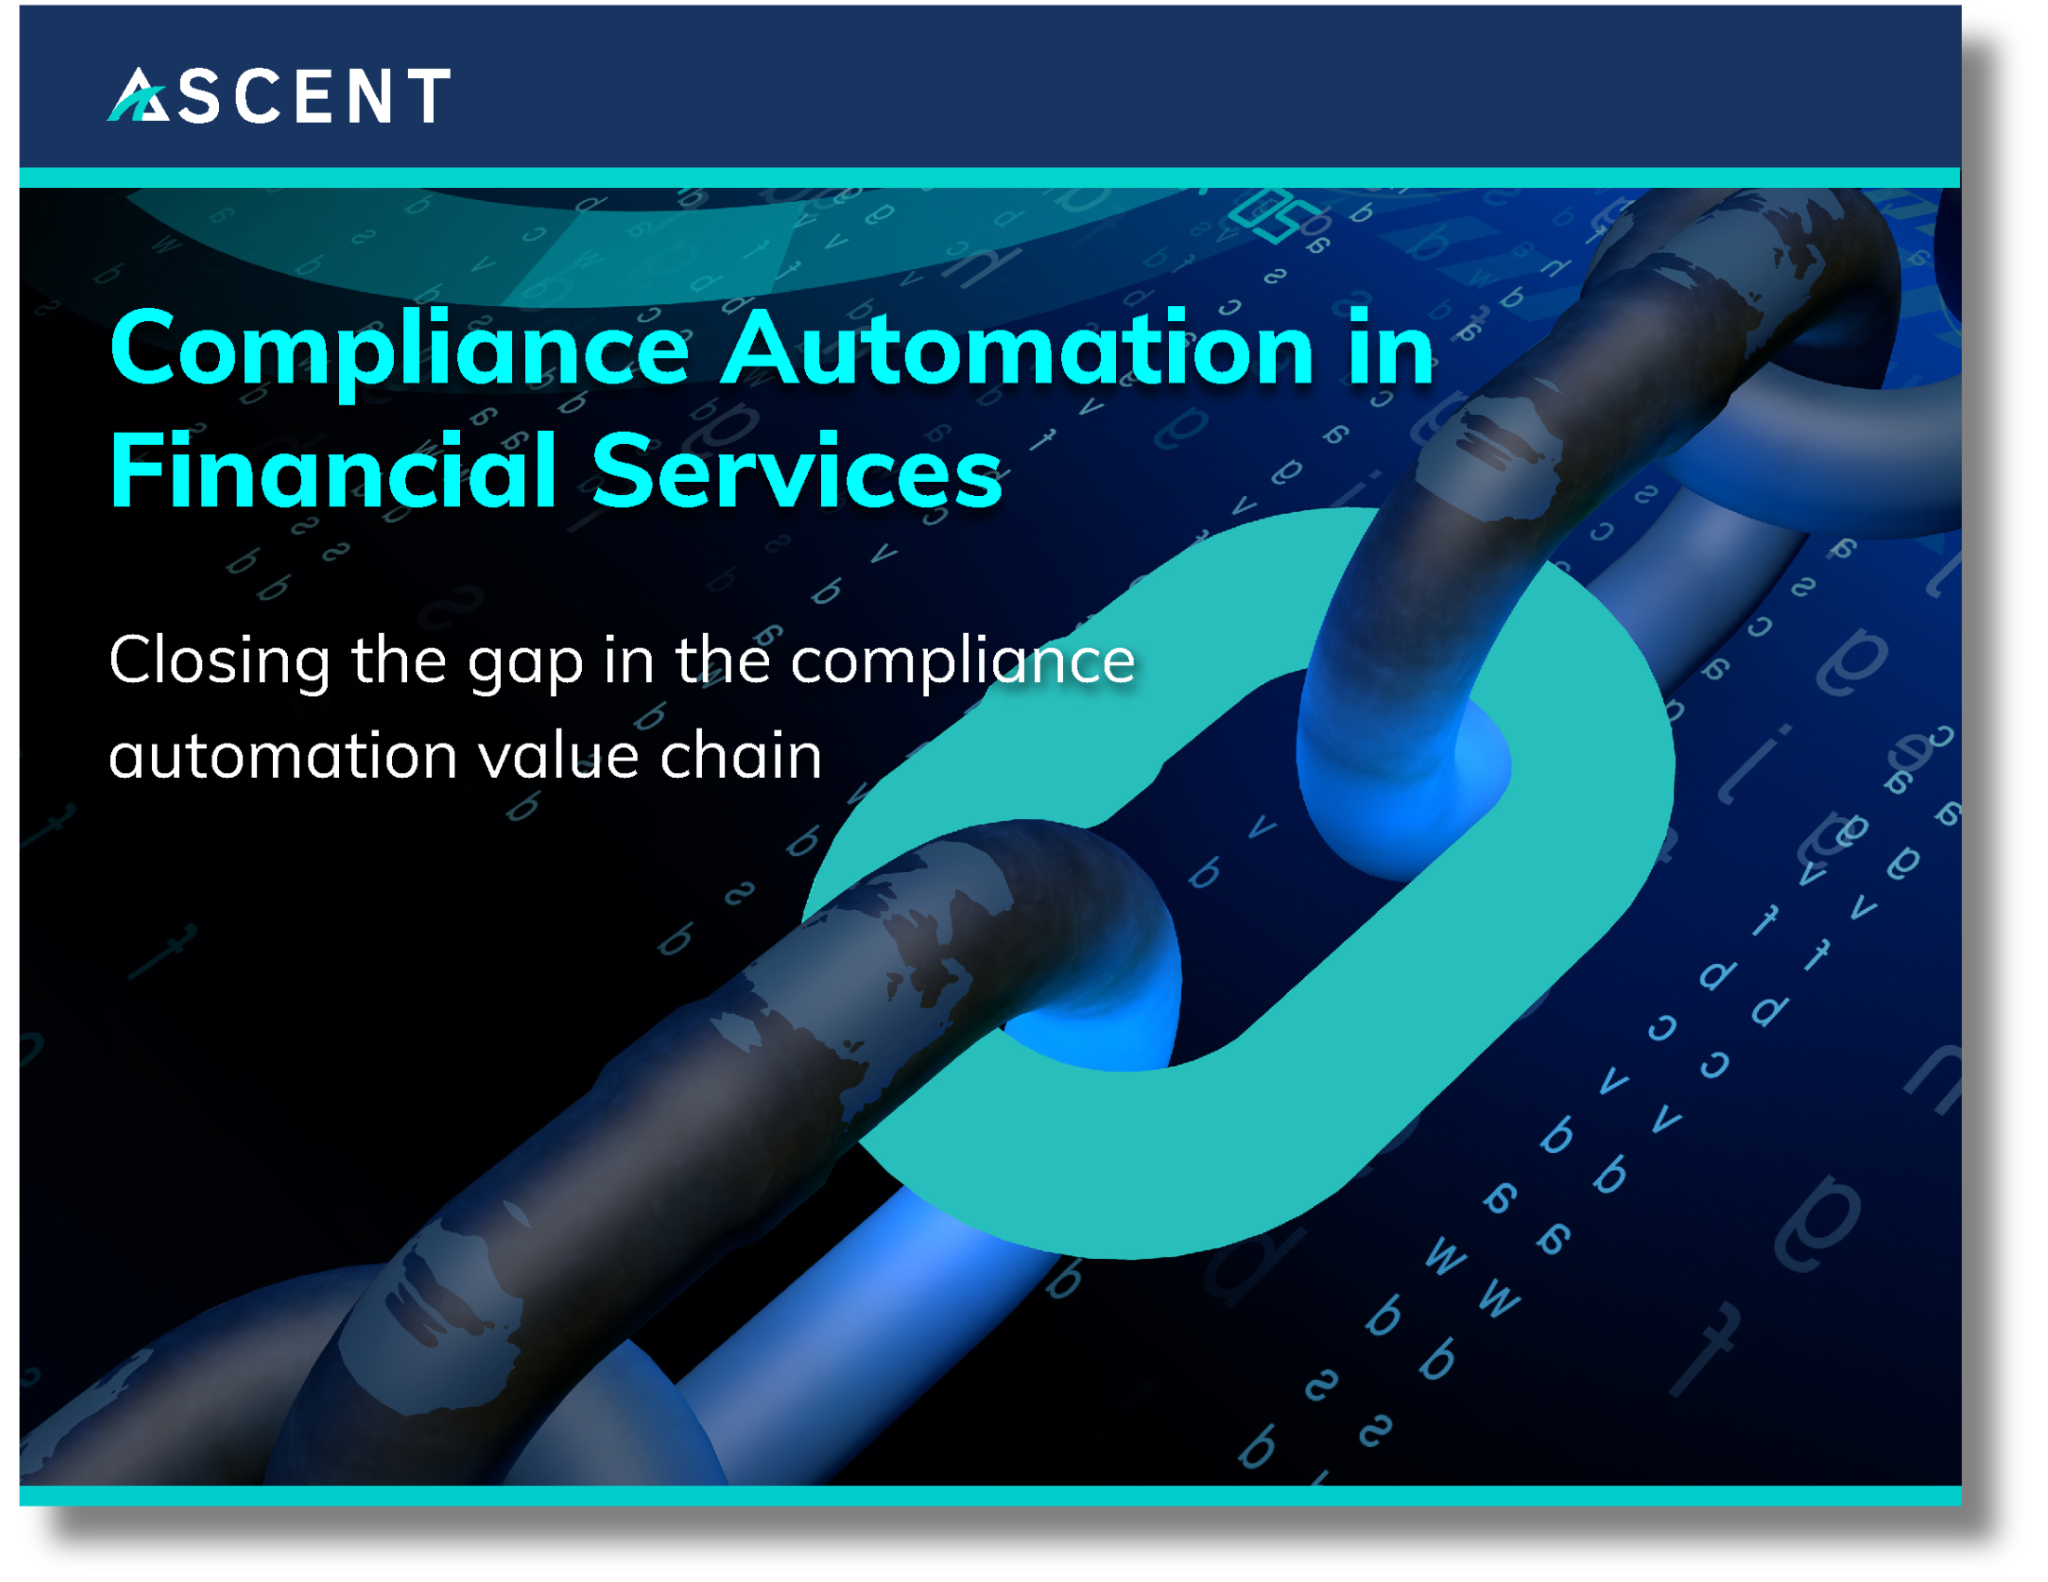 Gap in the Compliance Automation Value Chain